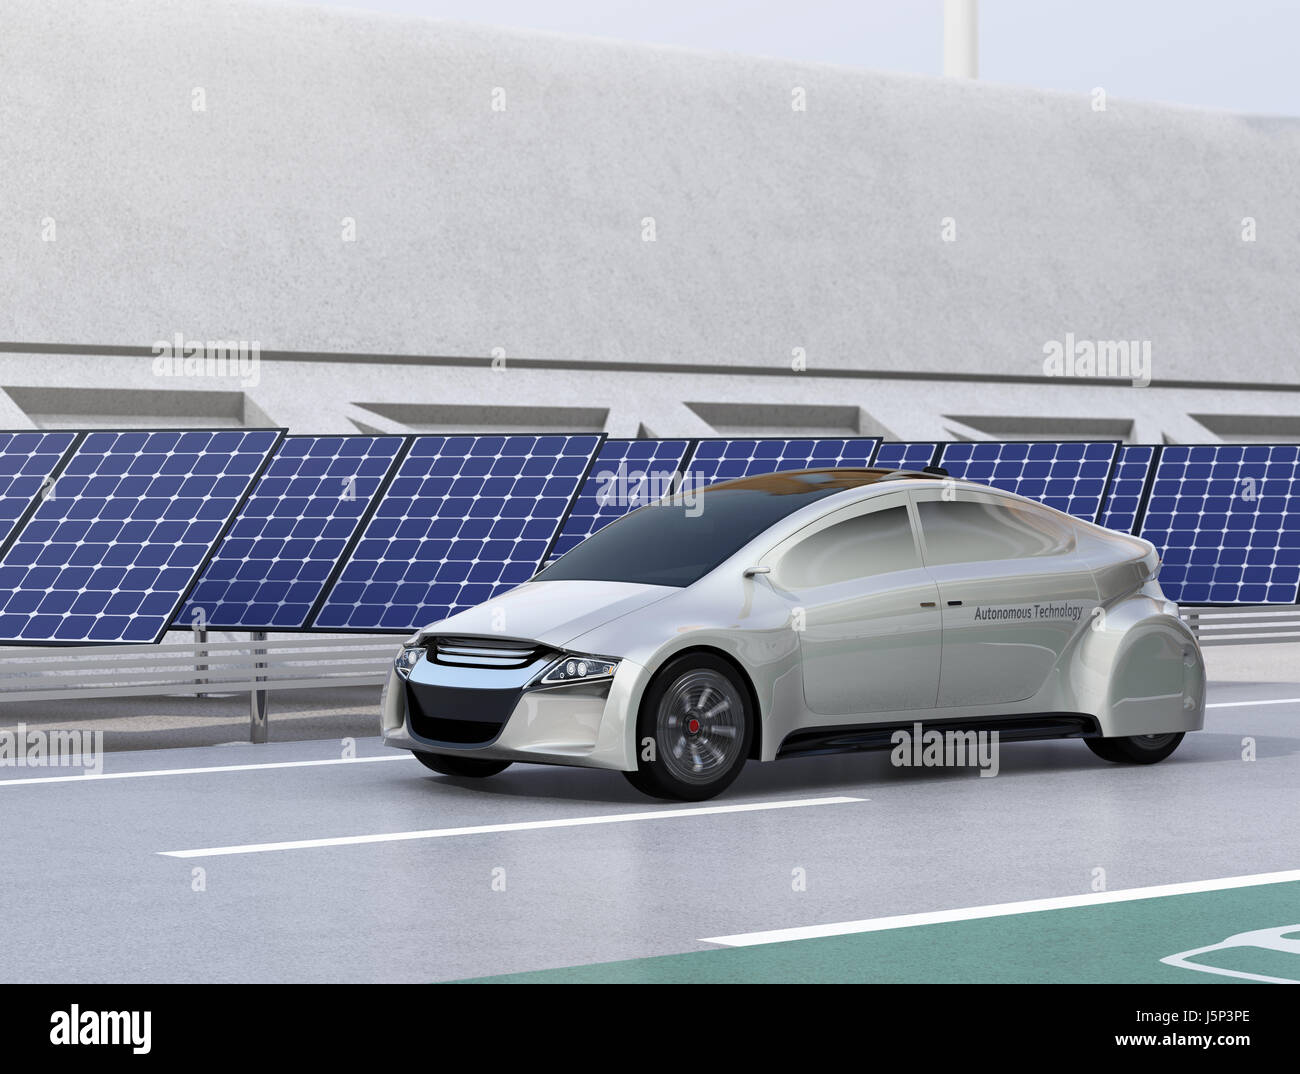 Electric car driving on the wireless charging lane of the highway.  Solar panel station and wind turbine on the roadside. 3D rendering image. Stock Photo